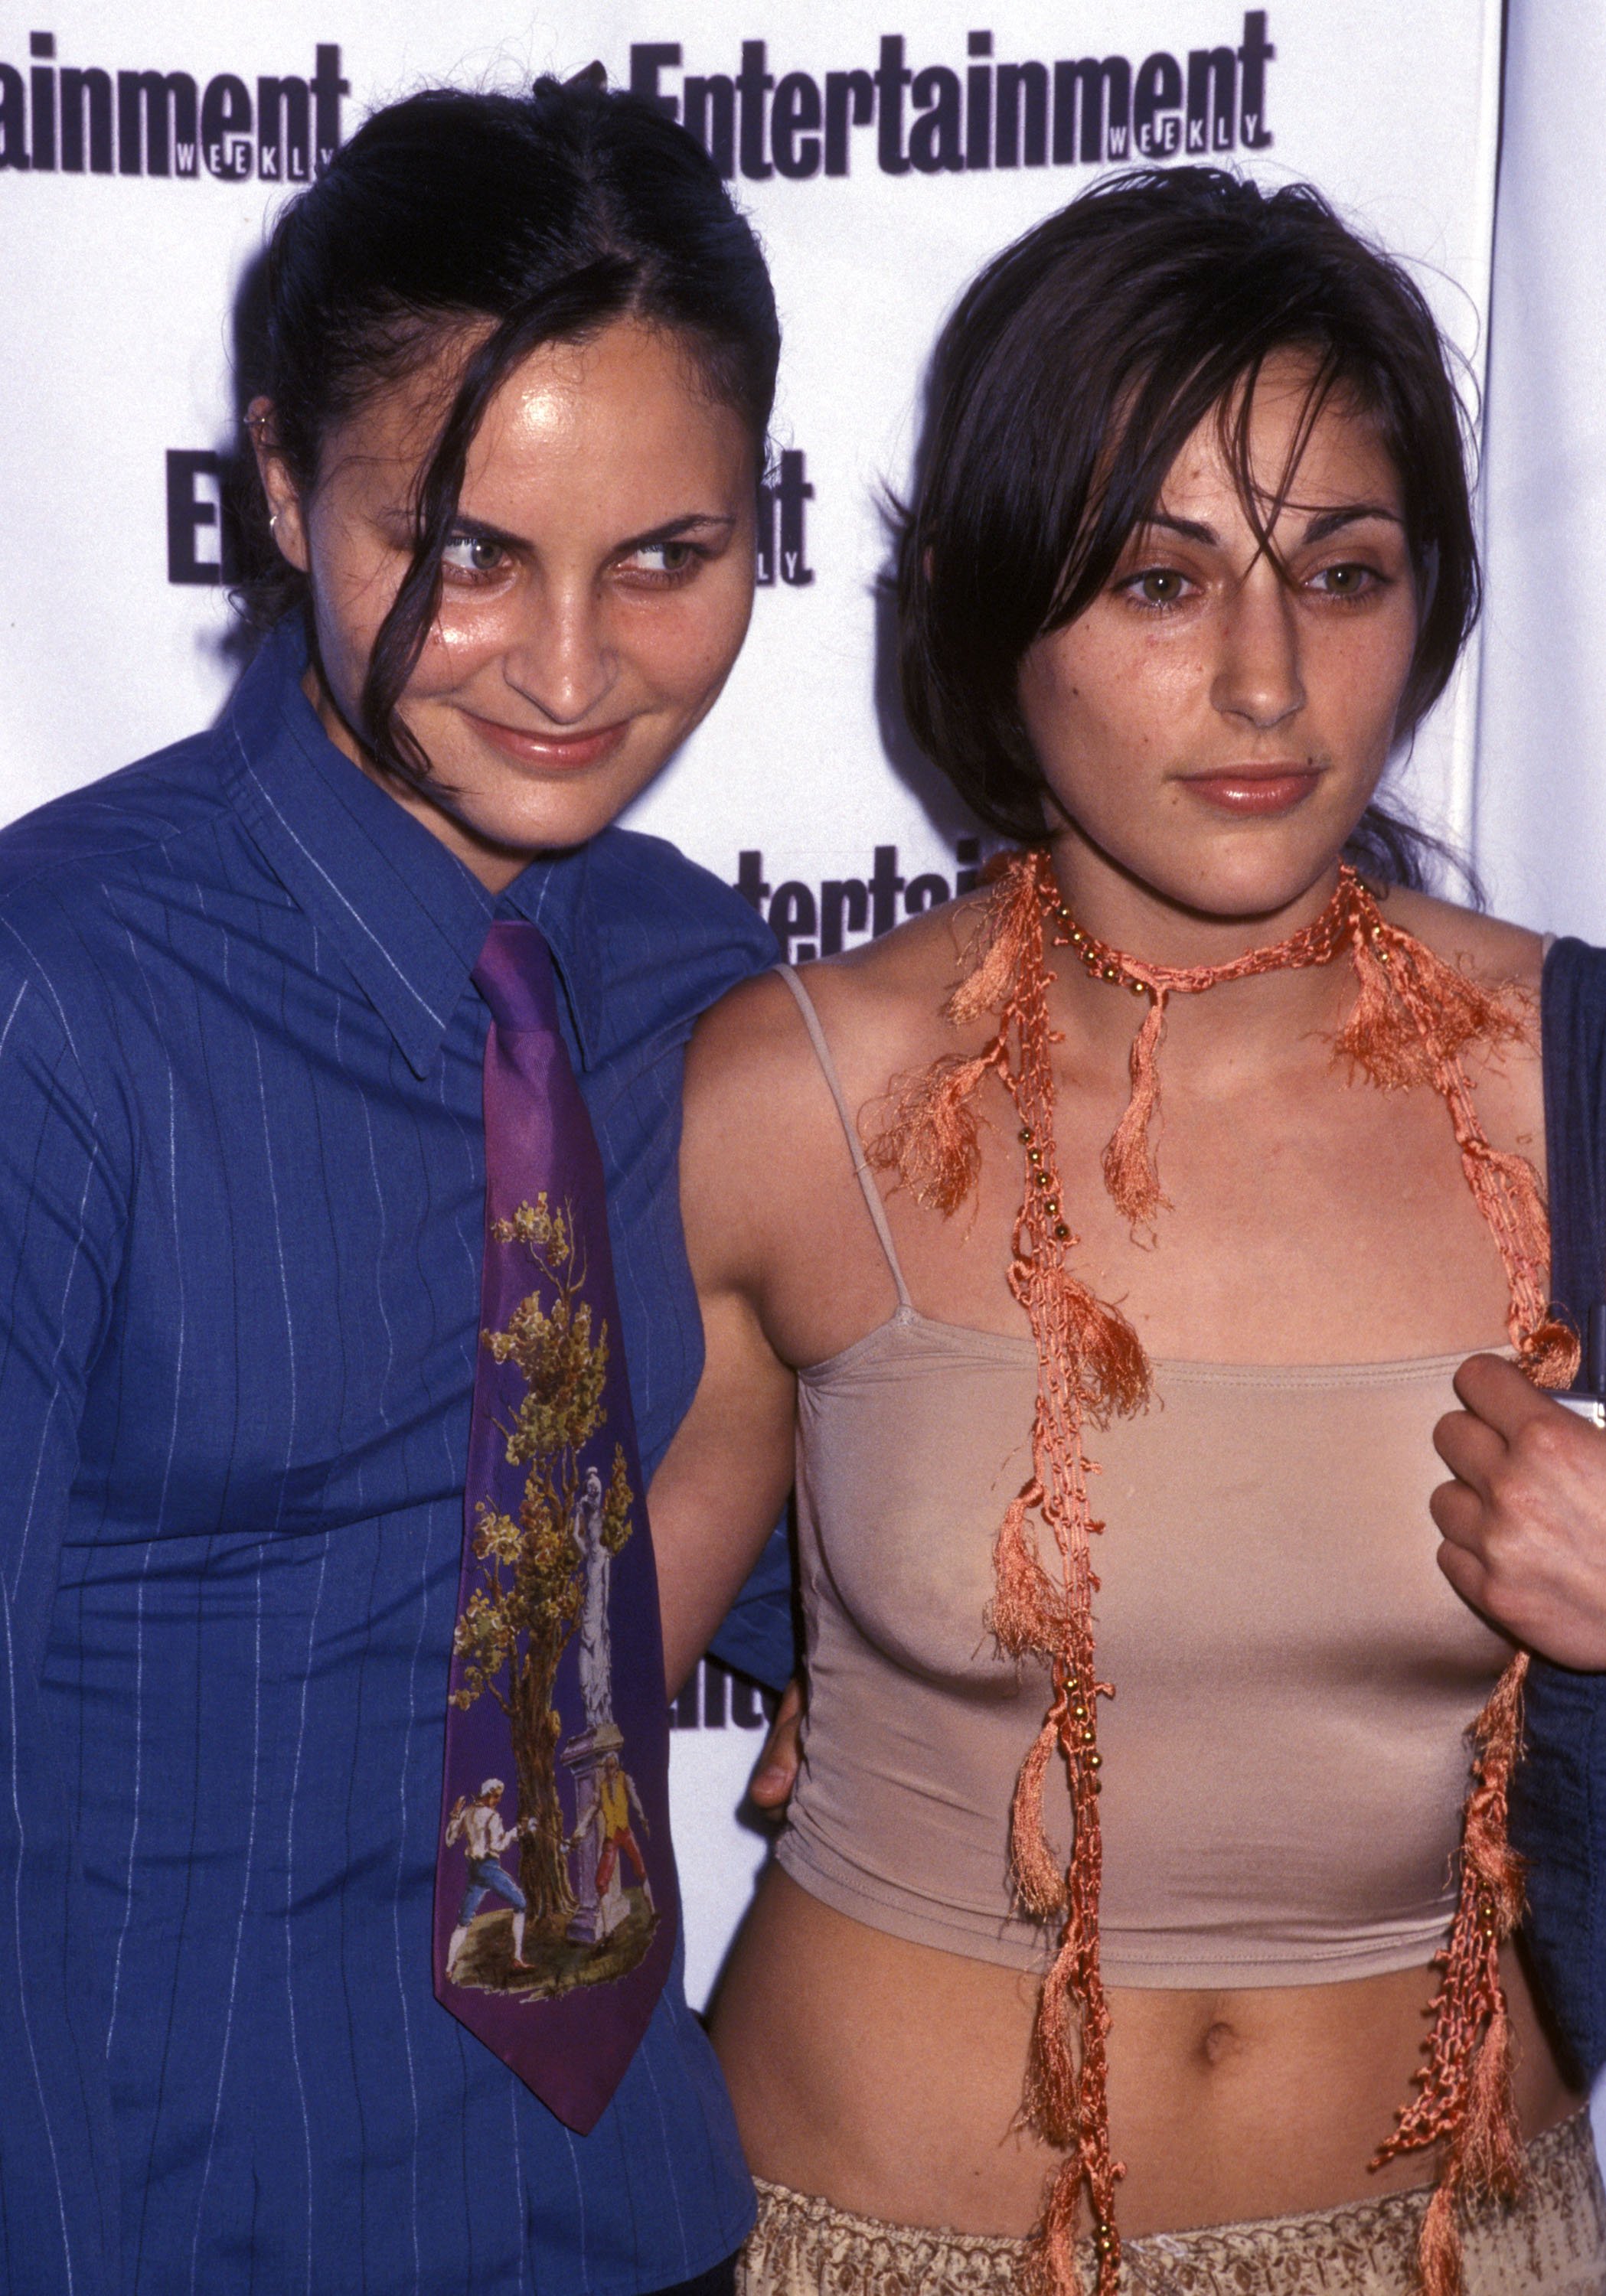 Rain Phoenix and Summer Phoenix attend the Entertainment Weekly’s First Annual It List Party on June 24, 2002, at Milk Studios in New York City. | Source: Getty Images